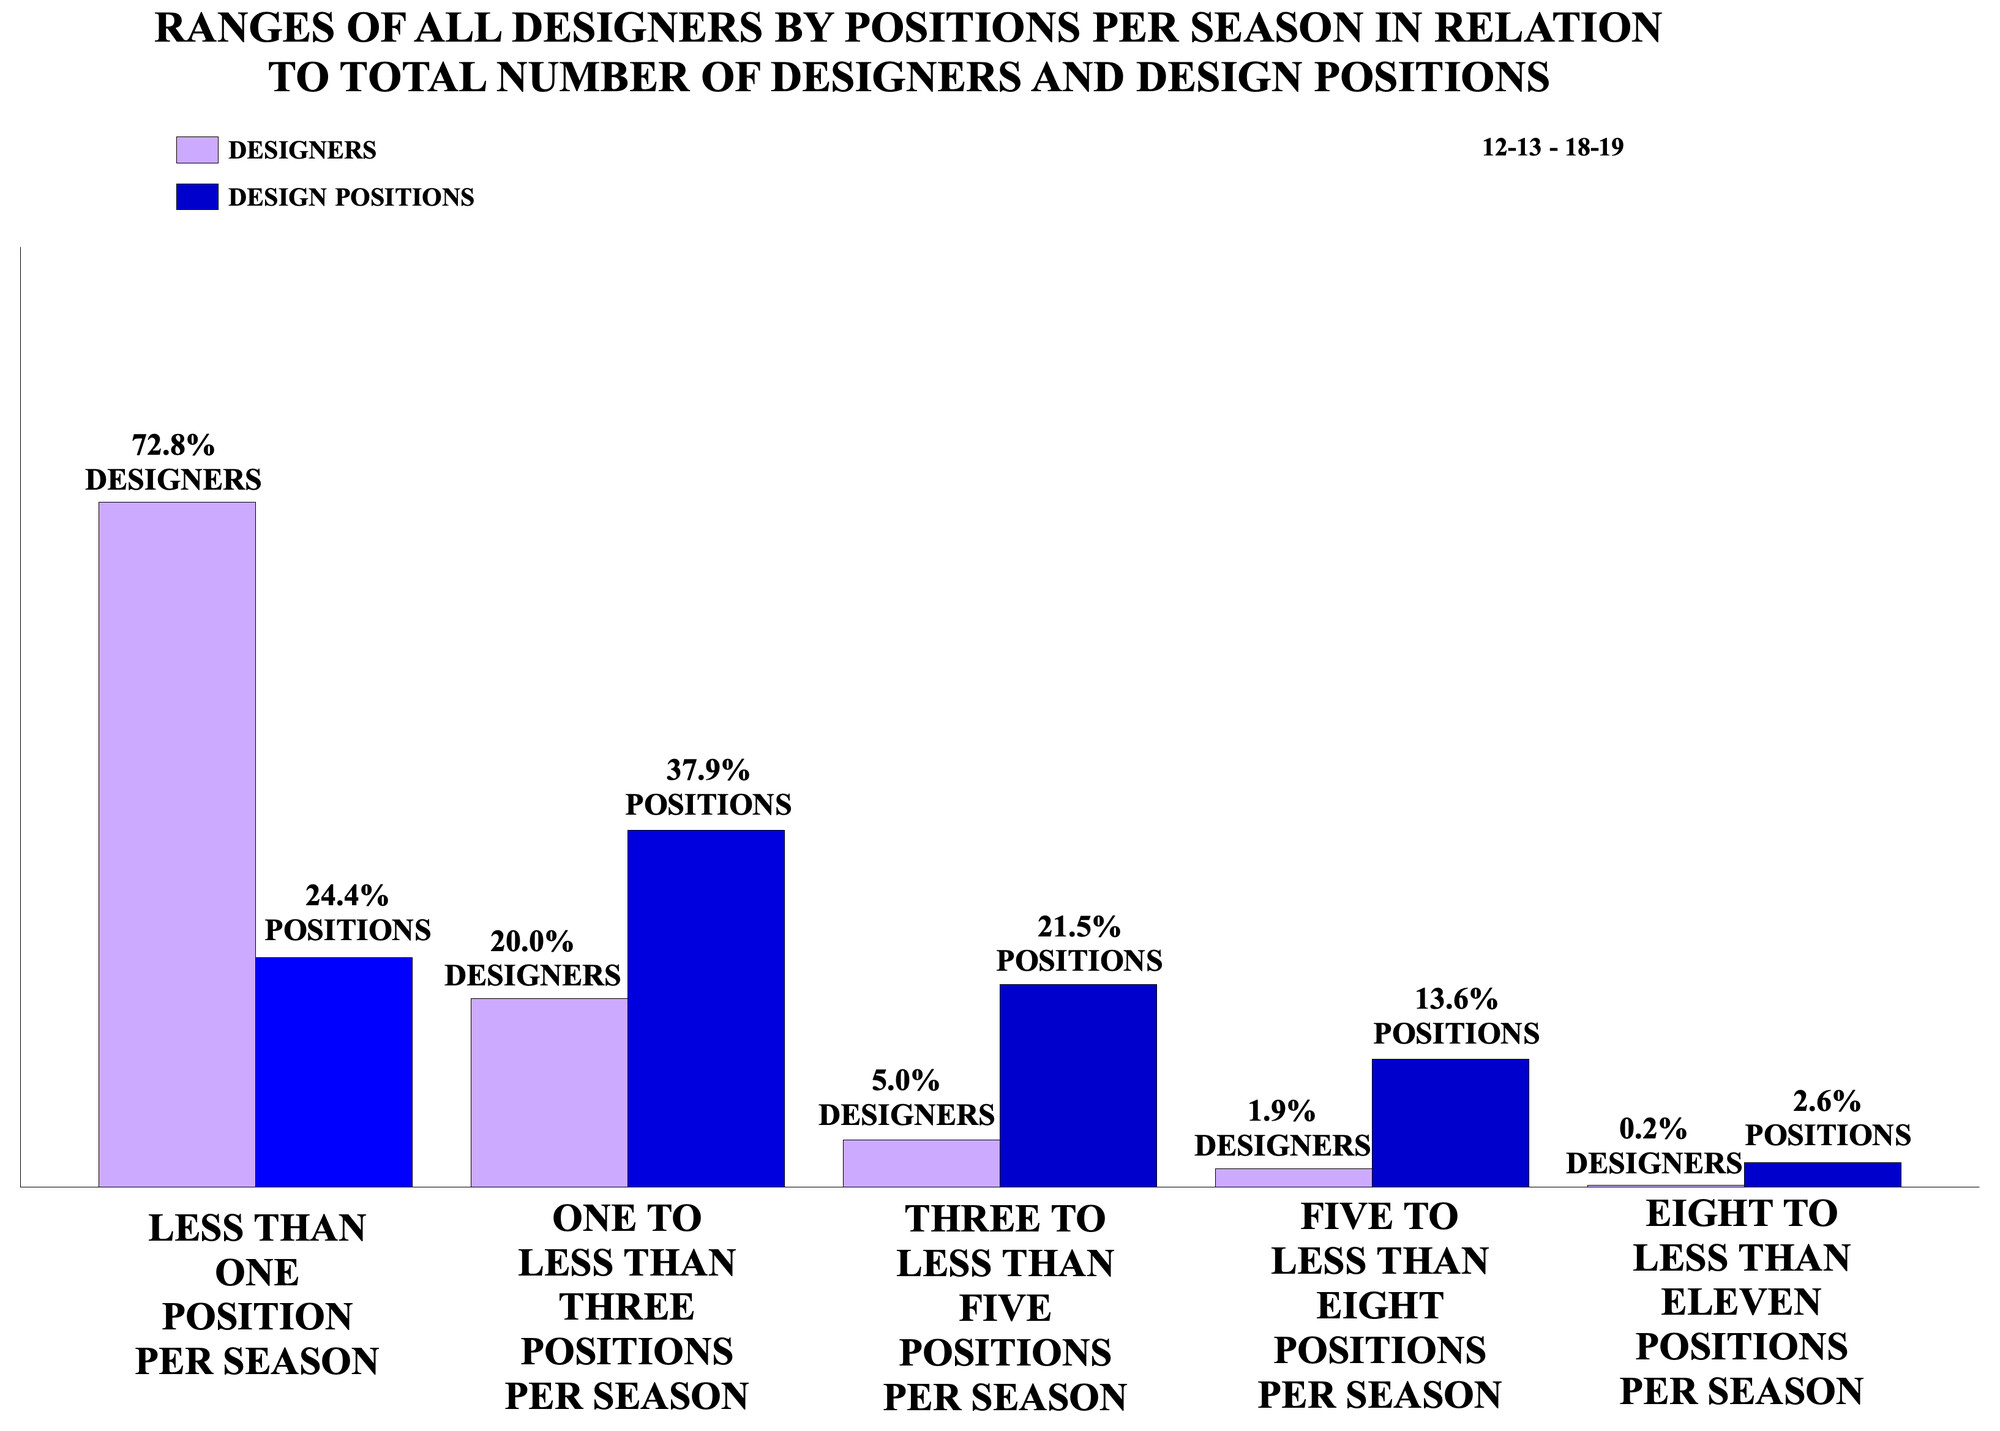 Ranges of All Designers by Positions Per Season in Relation to Total Number of Designers and Design Positions